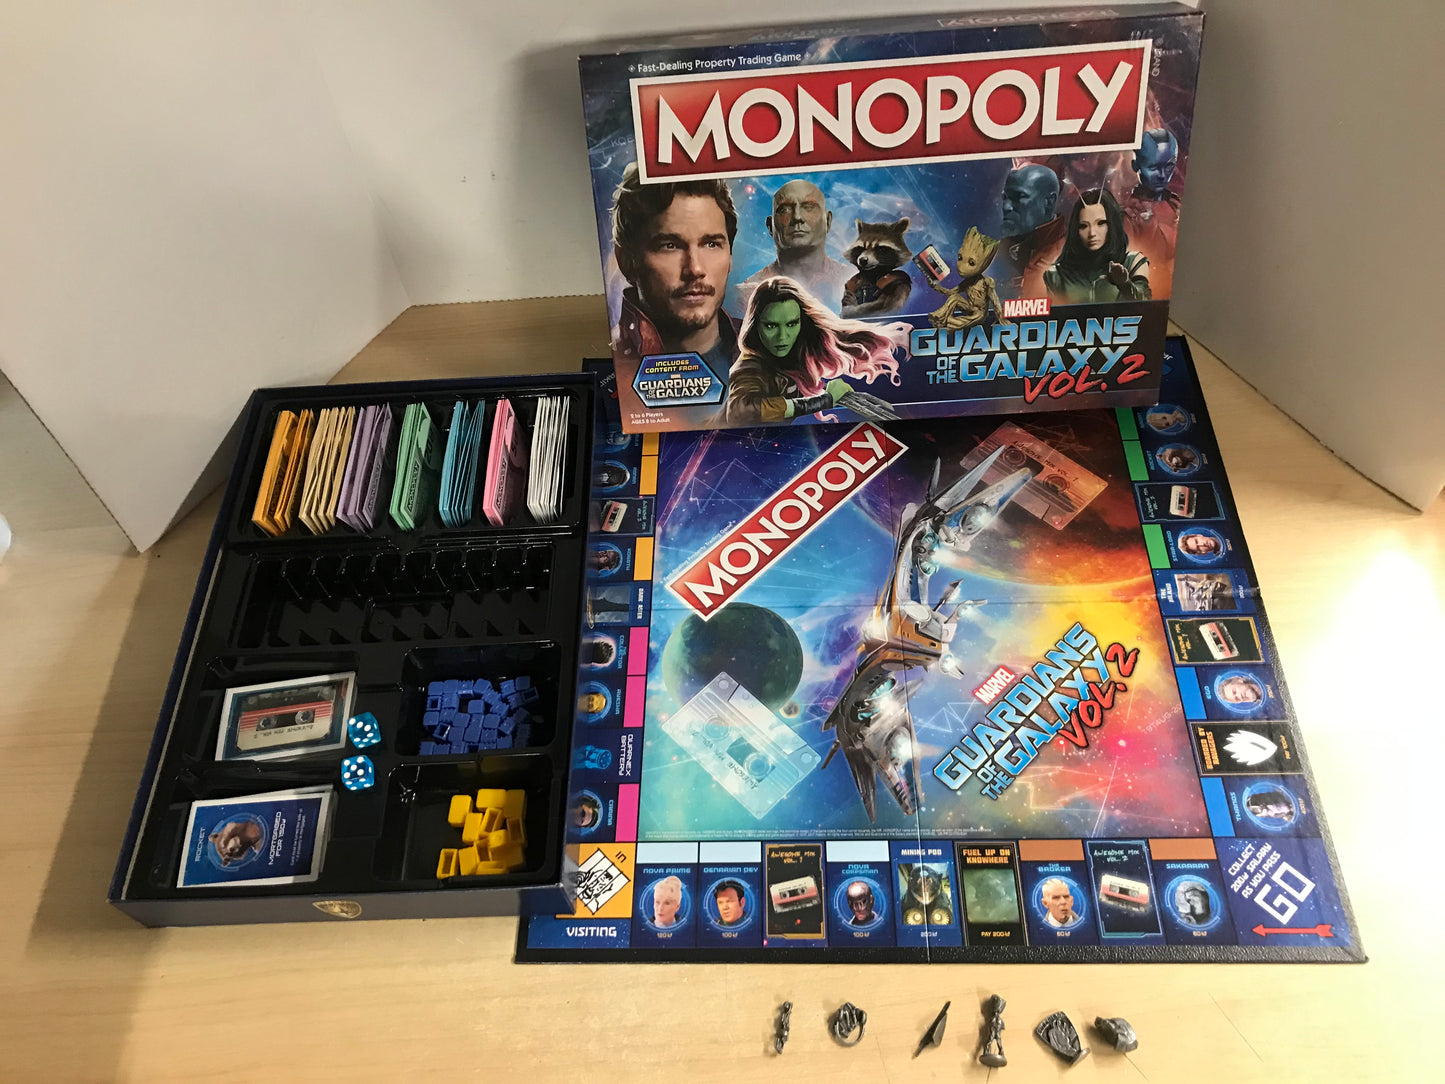 Game Monopoly Marvel  Guardians Of The Galaxy Vol. 2 Complete Excellent